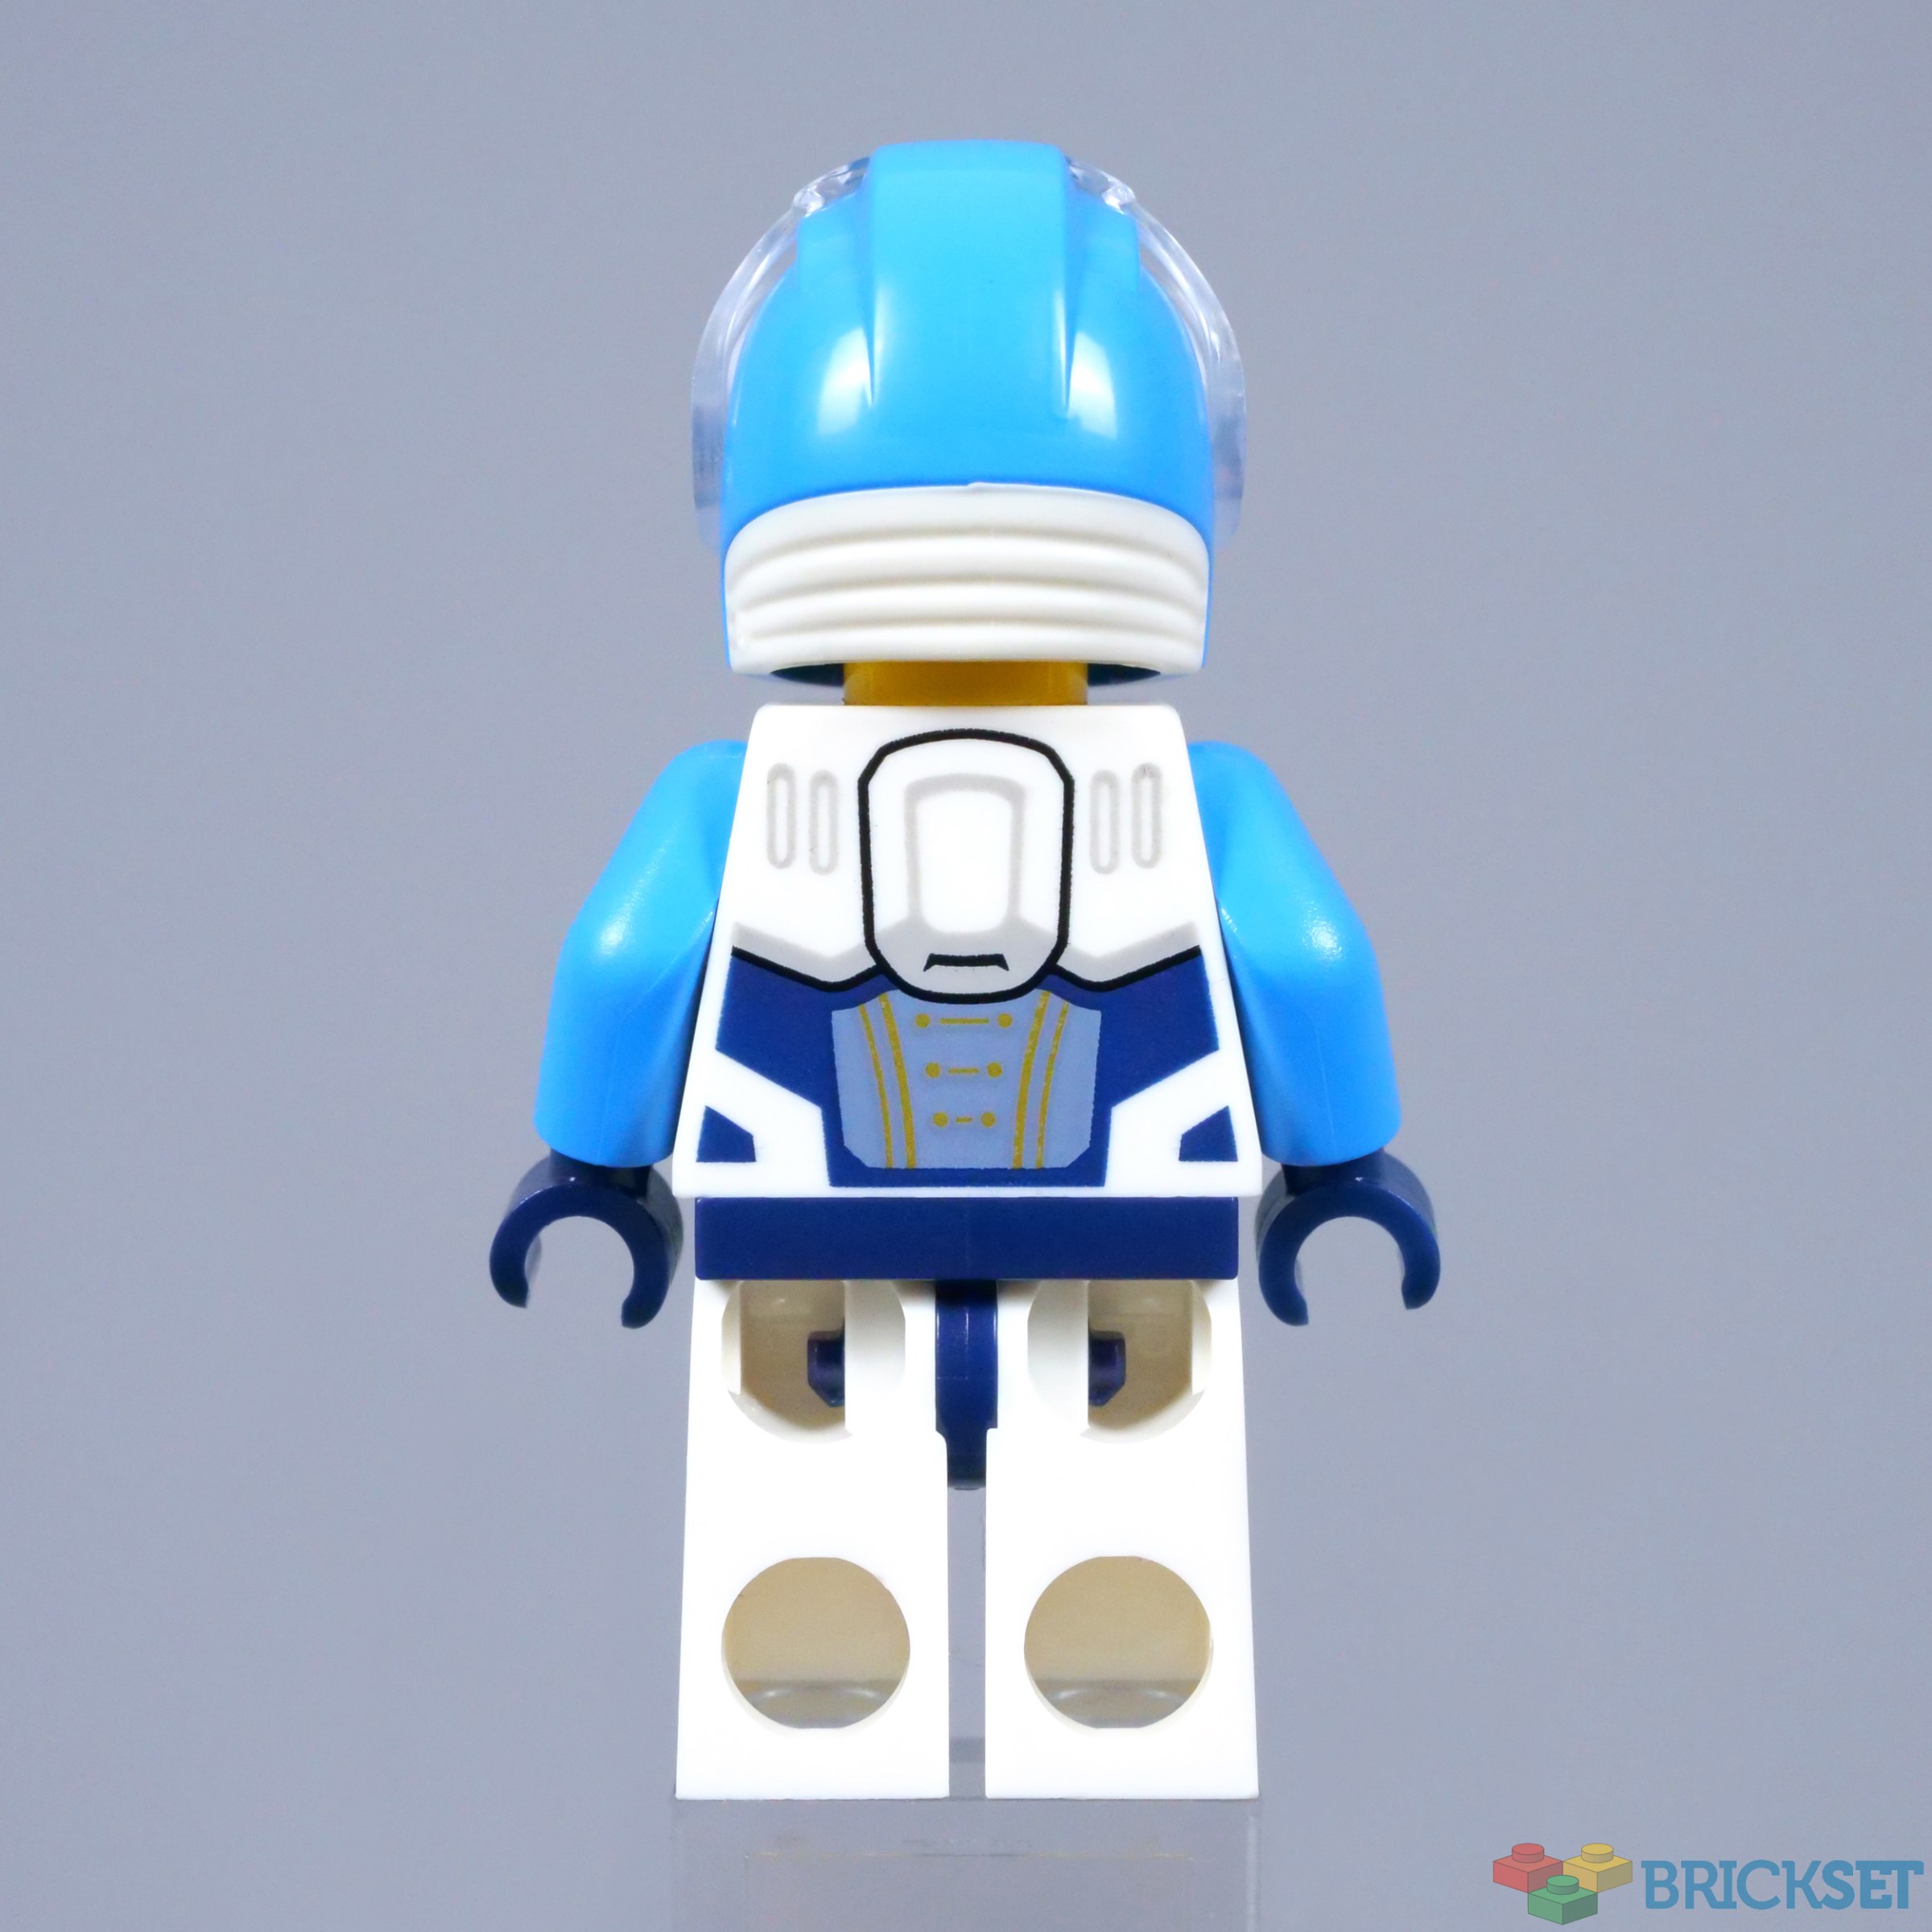 LEGO 71046 Collectible Space Minifigures: first image - BrickTastic